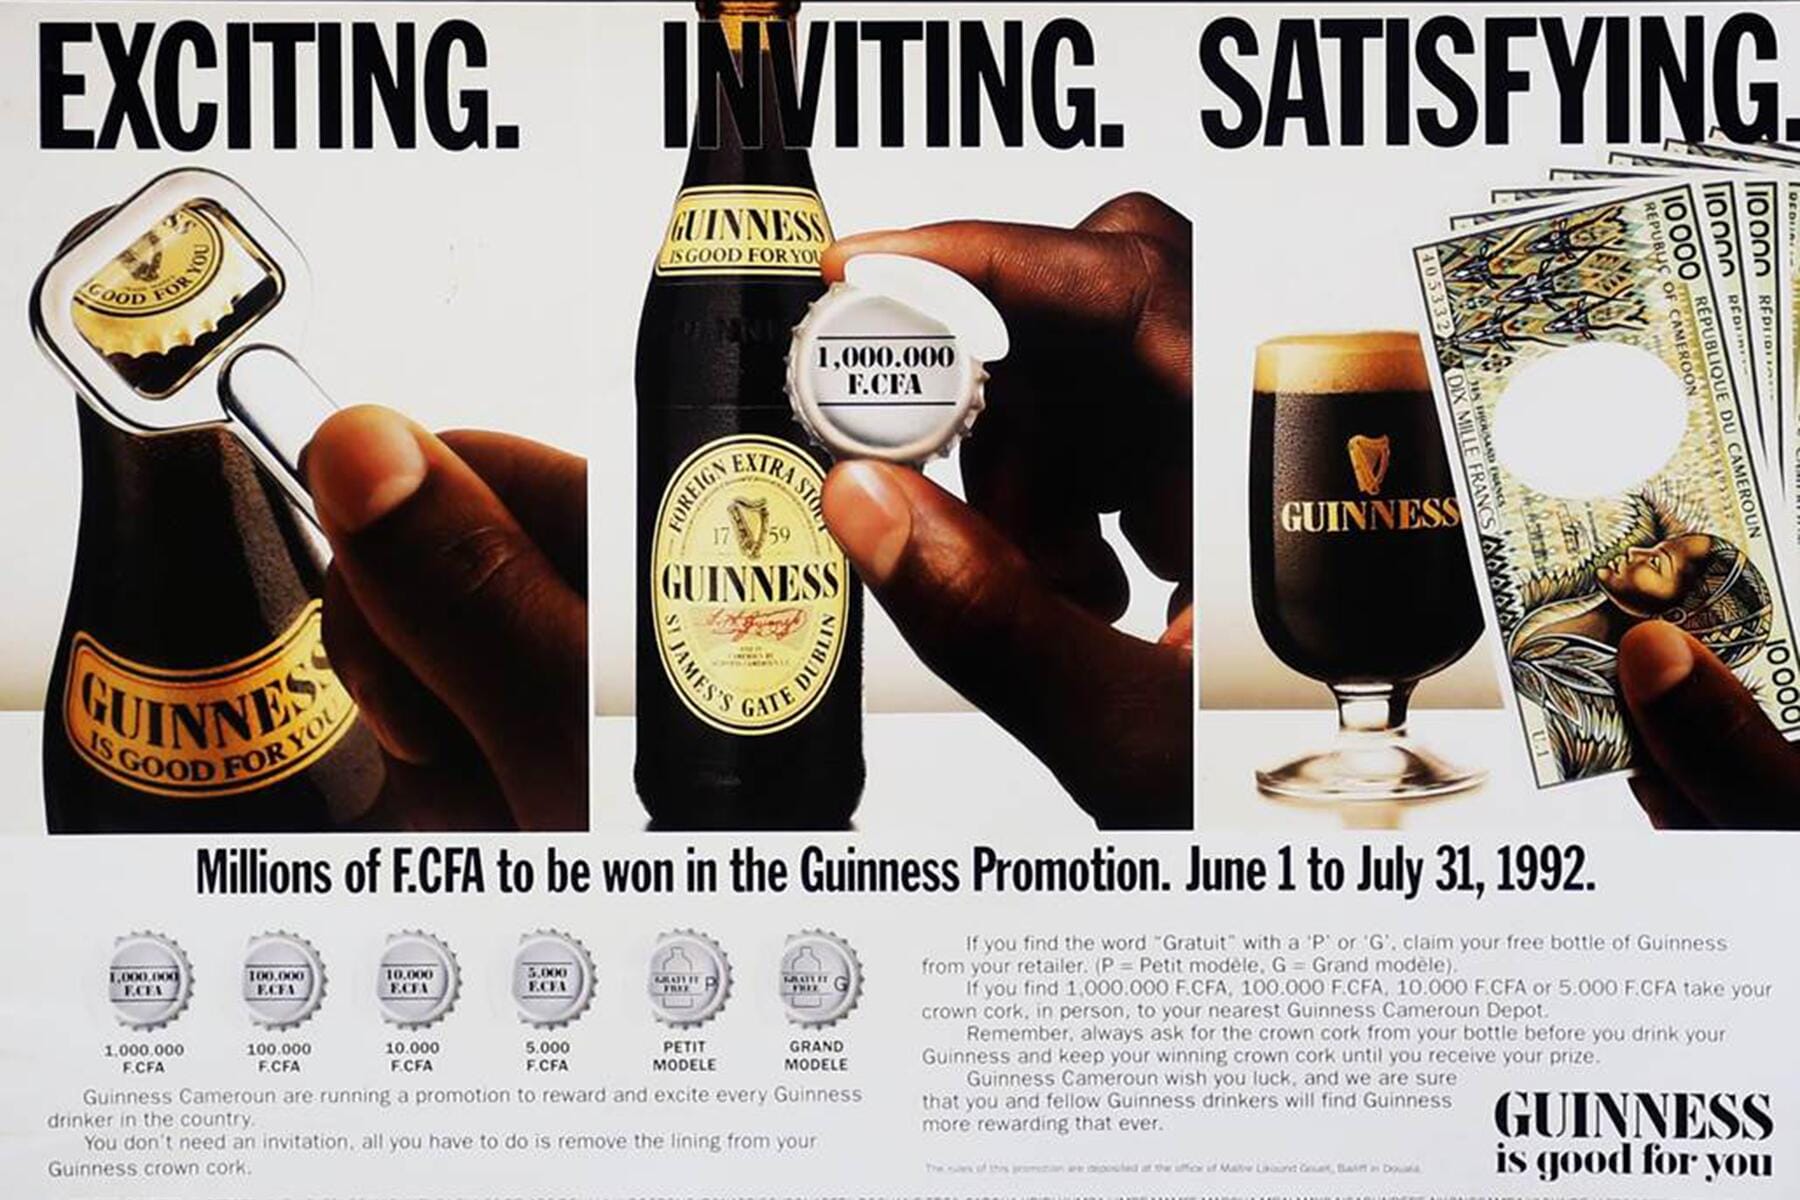 How Cameroon Became One of the Biggest Markets for Guinness Beer